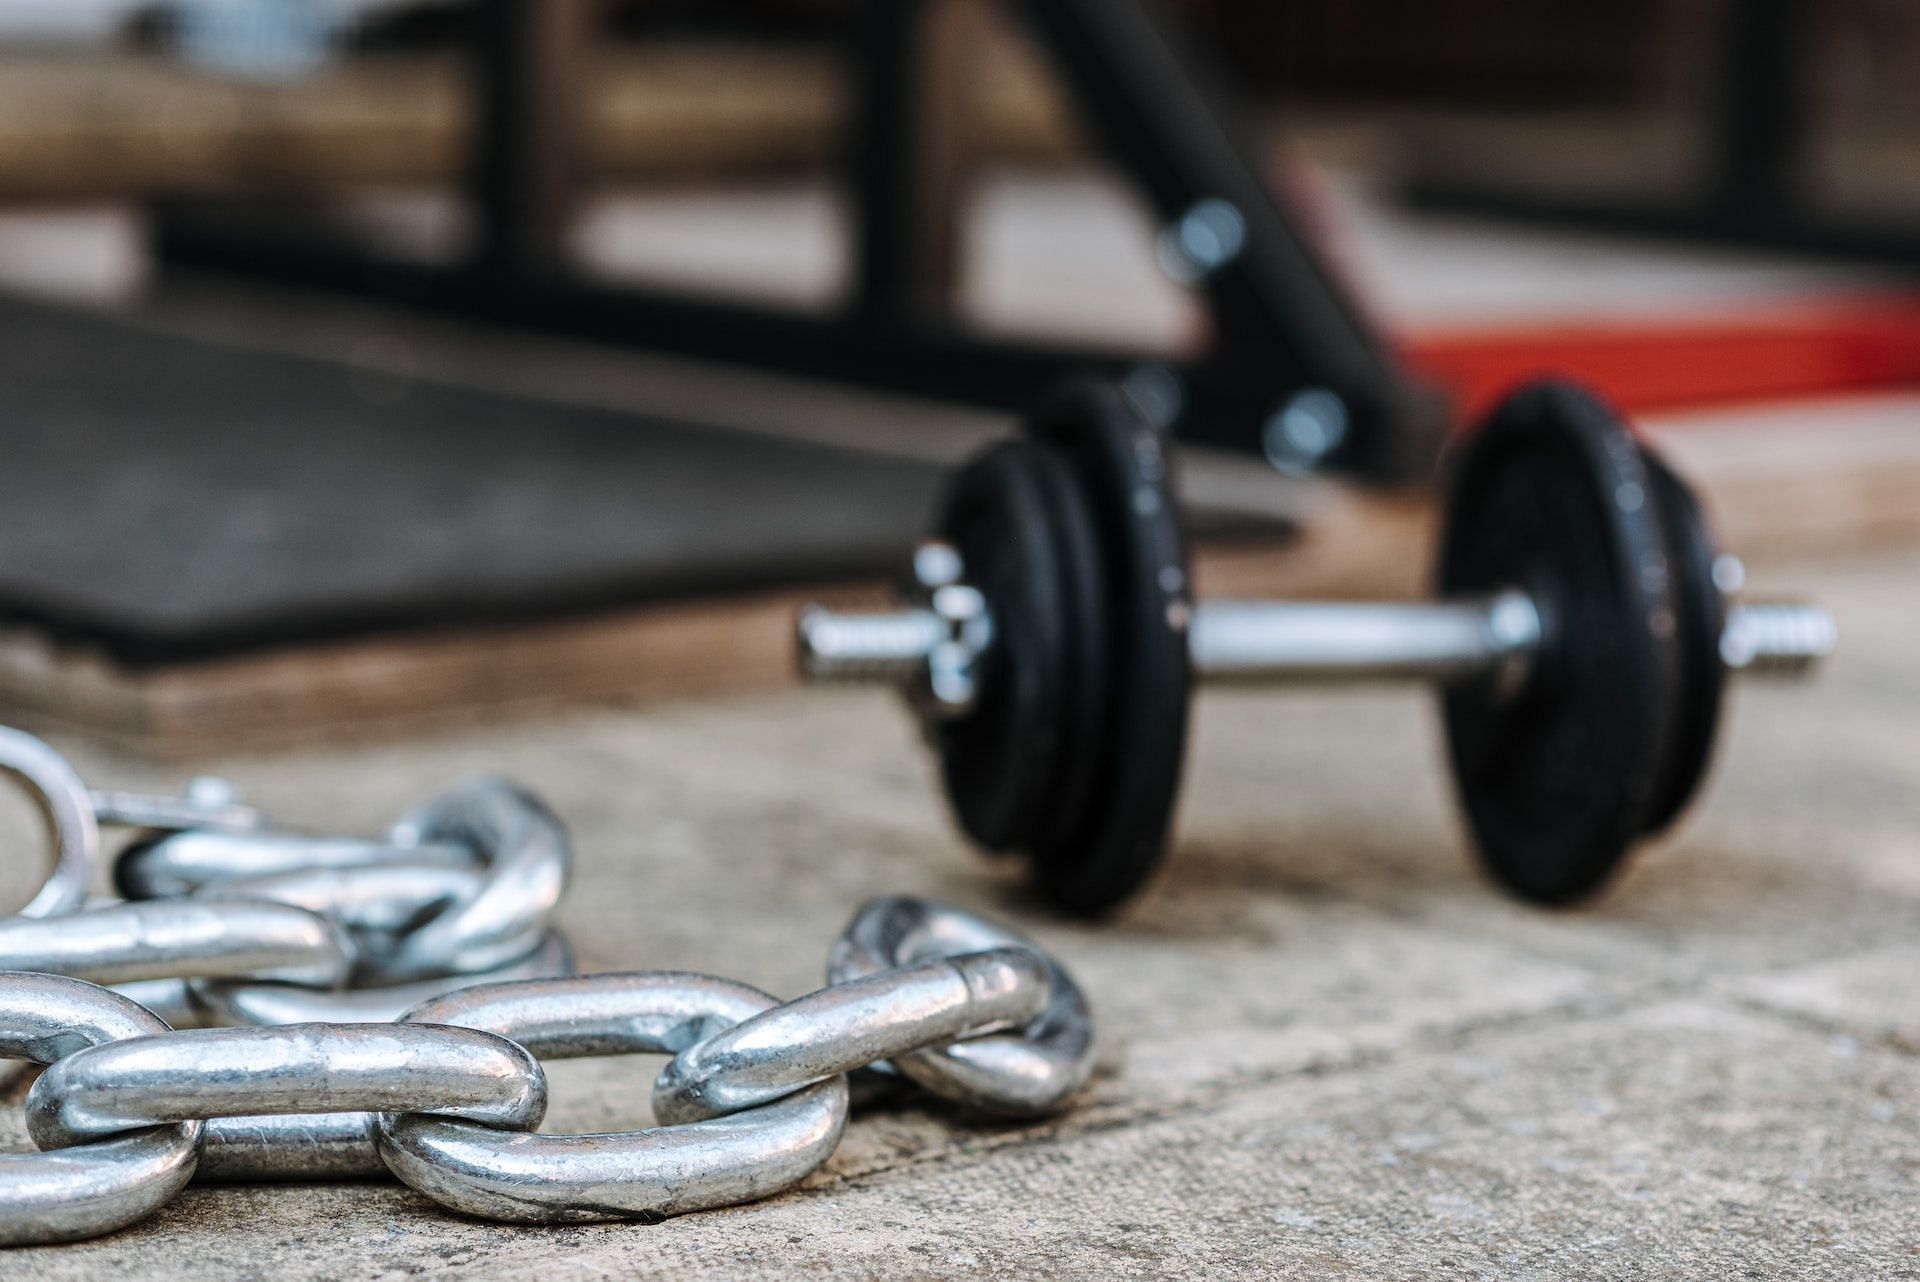 Floor chest press can be done using chains at the end of a barbell. (Photo via Pexels/Anete Lusina)